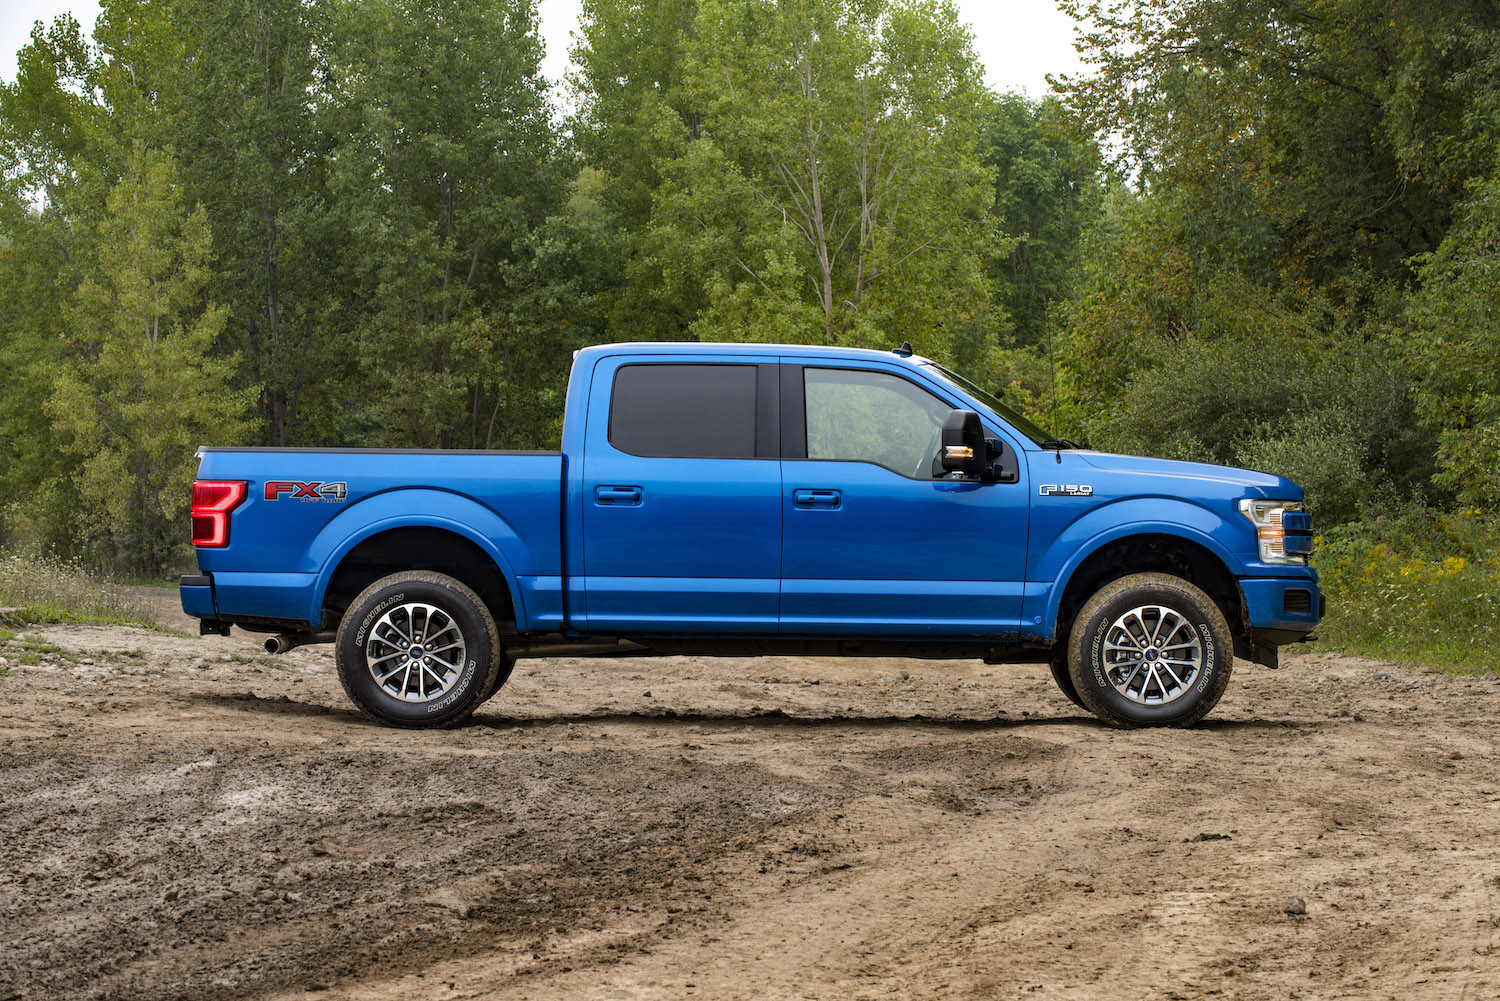 The blue Ford F-150 PowerBoost Hybrid pickup truck, the cheapest full-size hybrid option